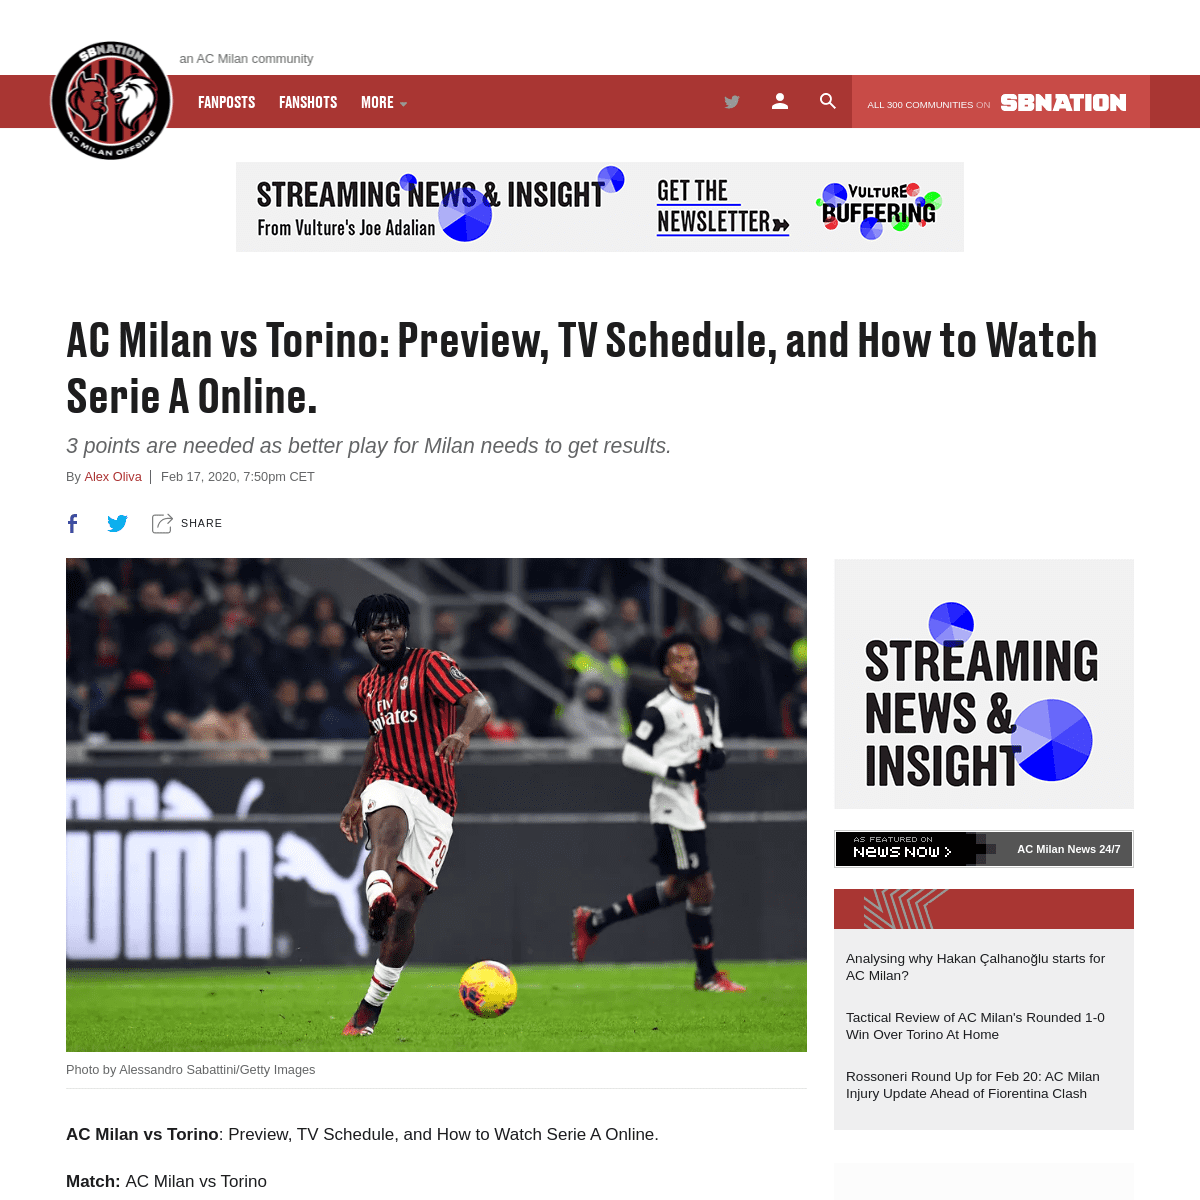 A complete backup of acmilan.theoffside.com/2020/2/17/21140955/ac-milan-vs-torino-preview-tv-schedule-and-how-to-watch-serie-a-o